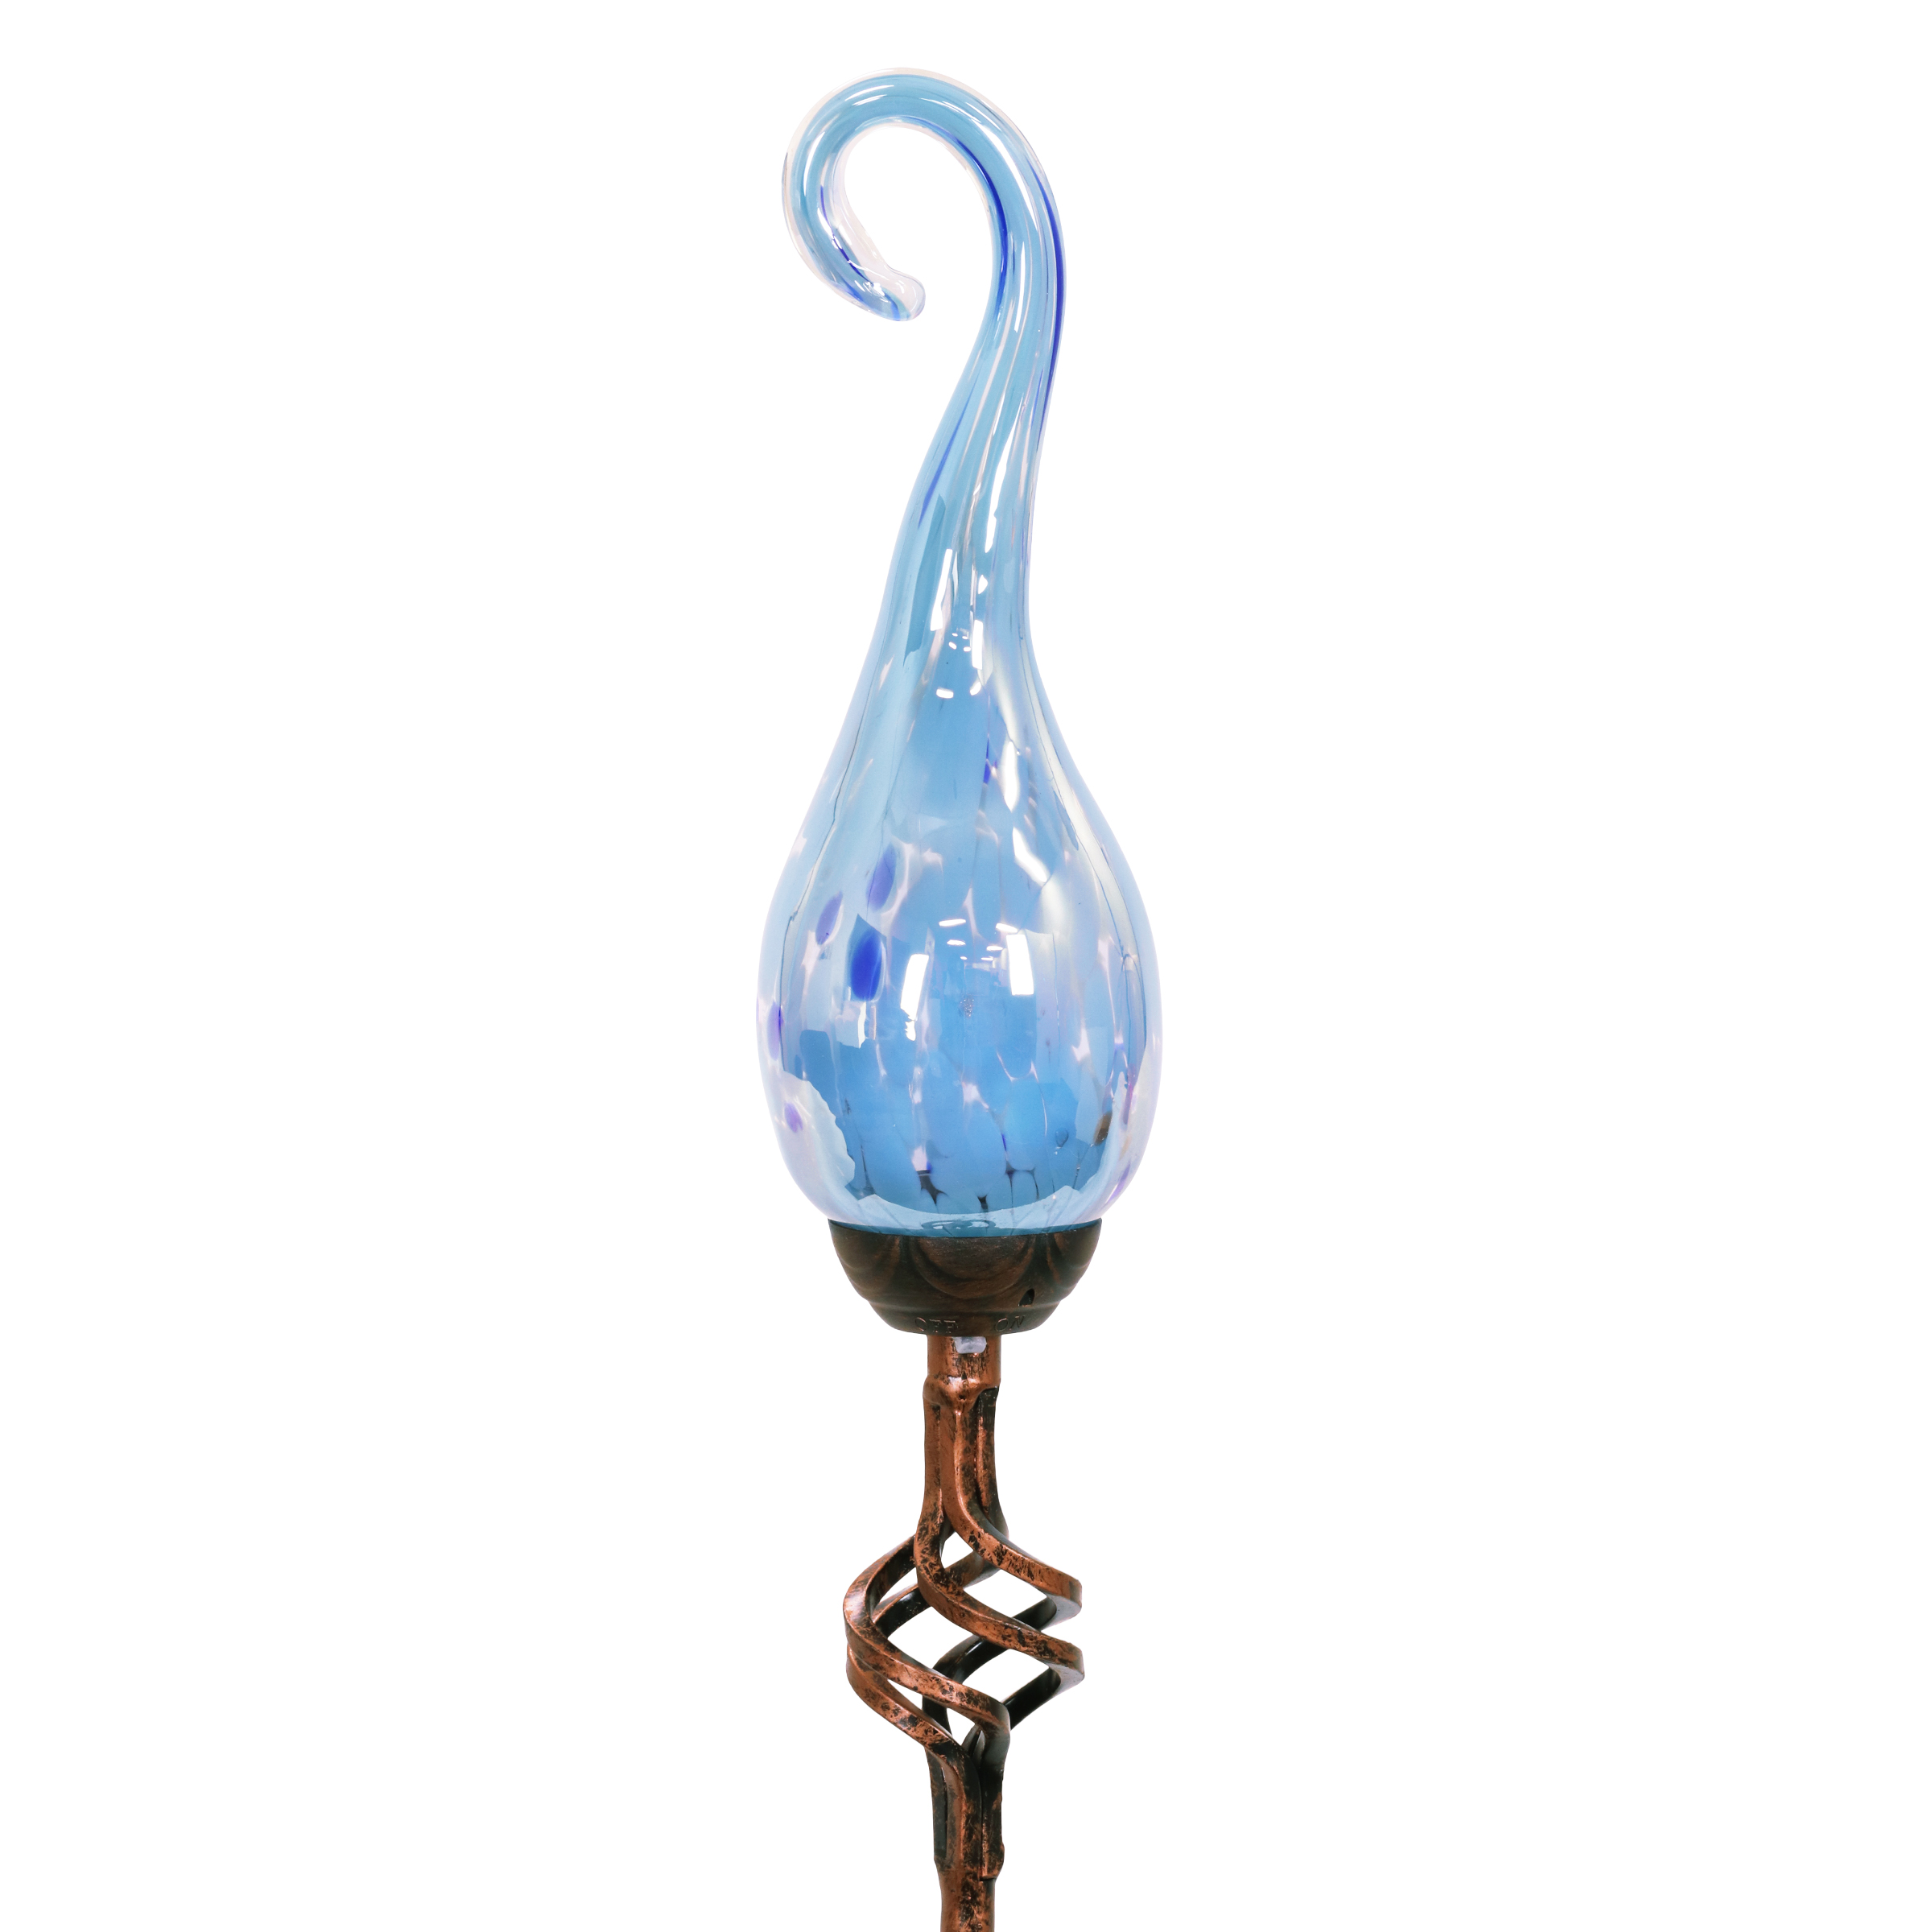 Exhart Light Blue Glass Spiral Flame  Solar Powered Garden Stake, 36 inch (Decor for Home Patio, Outdoor Garden, Yard or Lawn), Metal, Teal - image 1 of 7